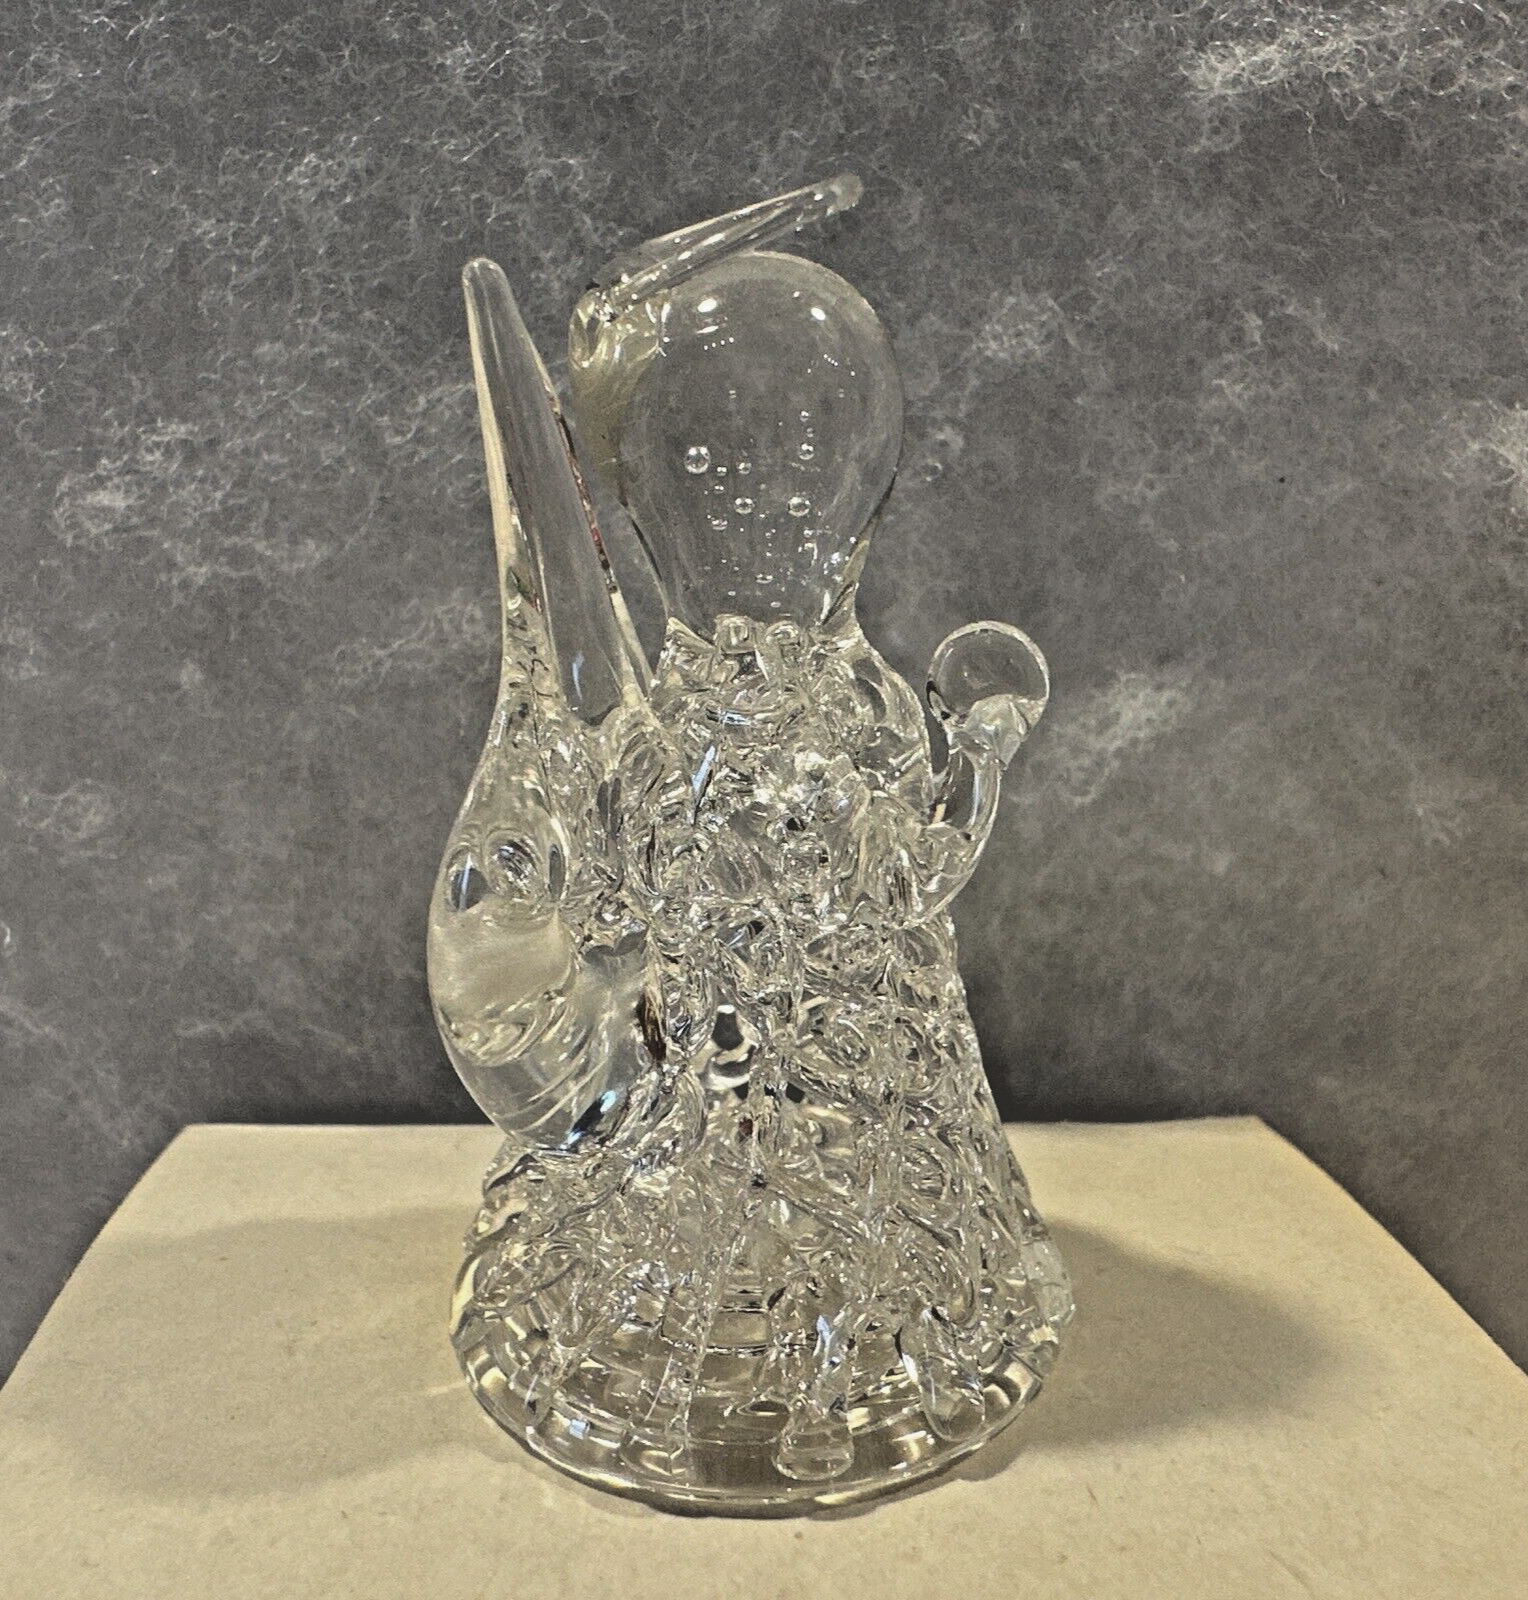 Vintage 1960s Spun Glass Angel Figurine 2 1/4 inches with Original Box - Germany